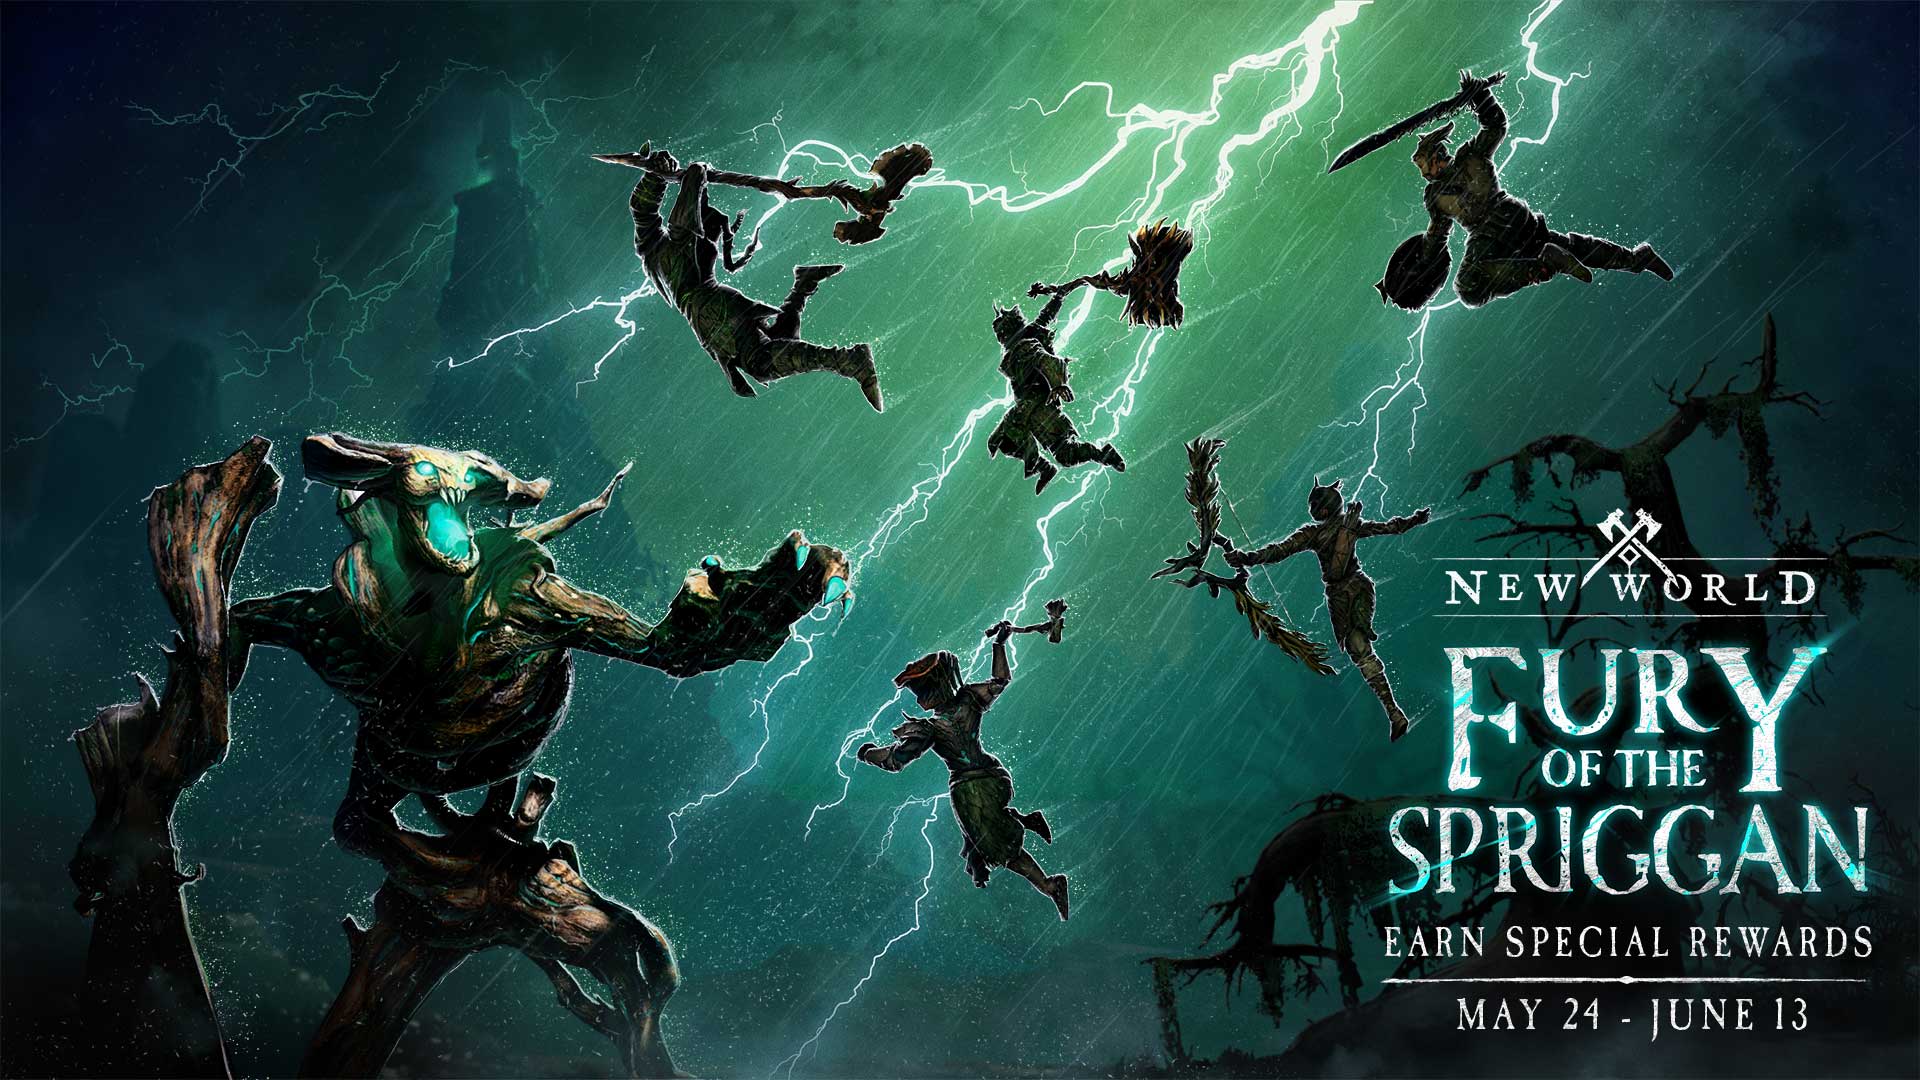 New World Announces “Fury of the Spriggan” Event, Offering Adventurers an Immersive Encounter and Exclusive Rewards